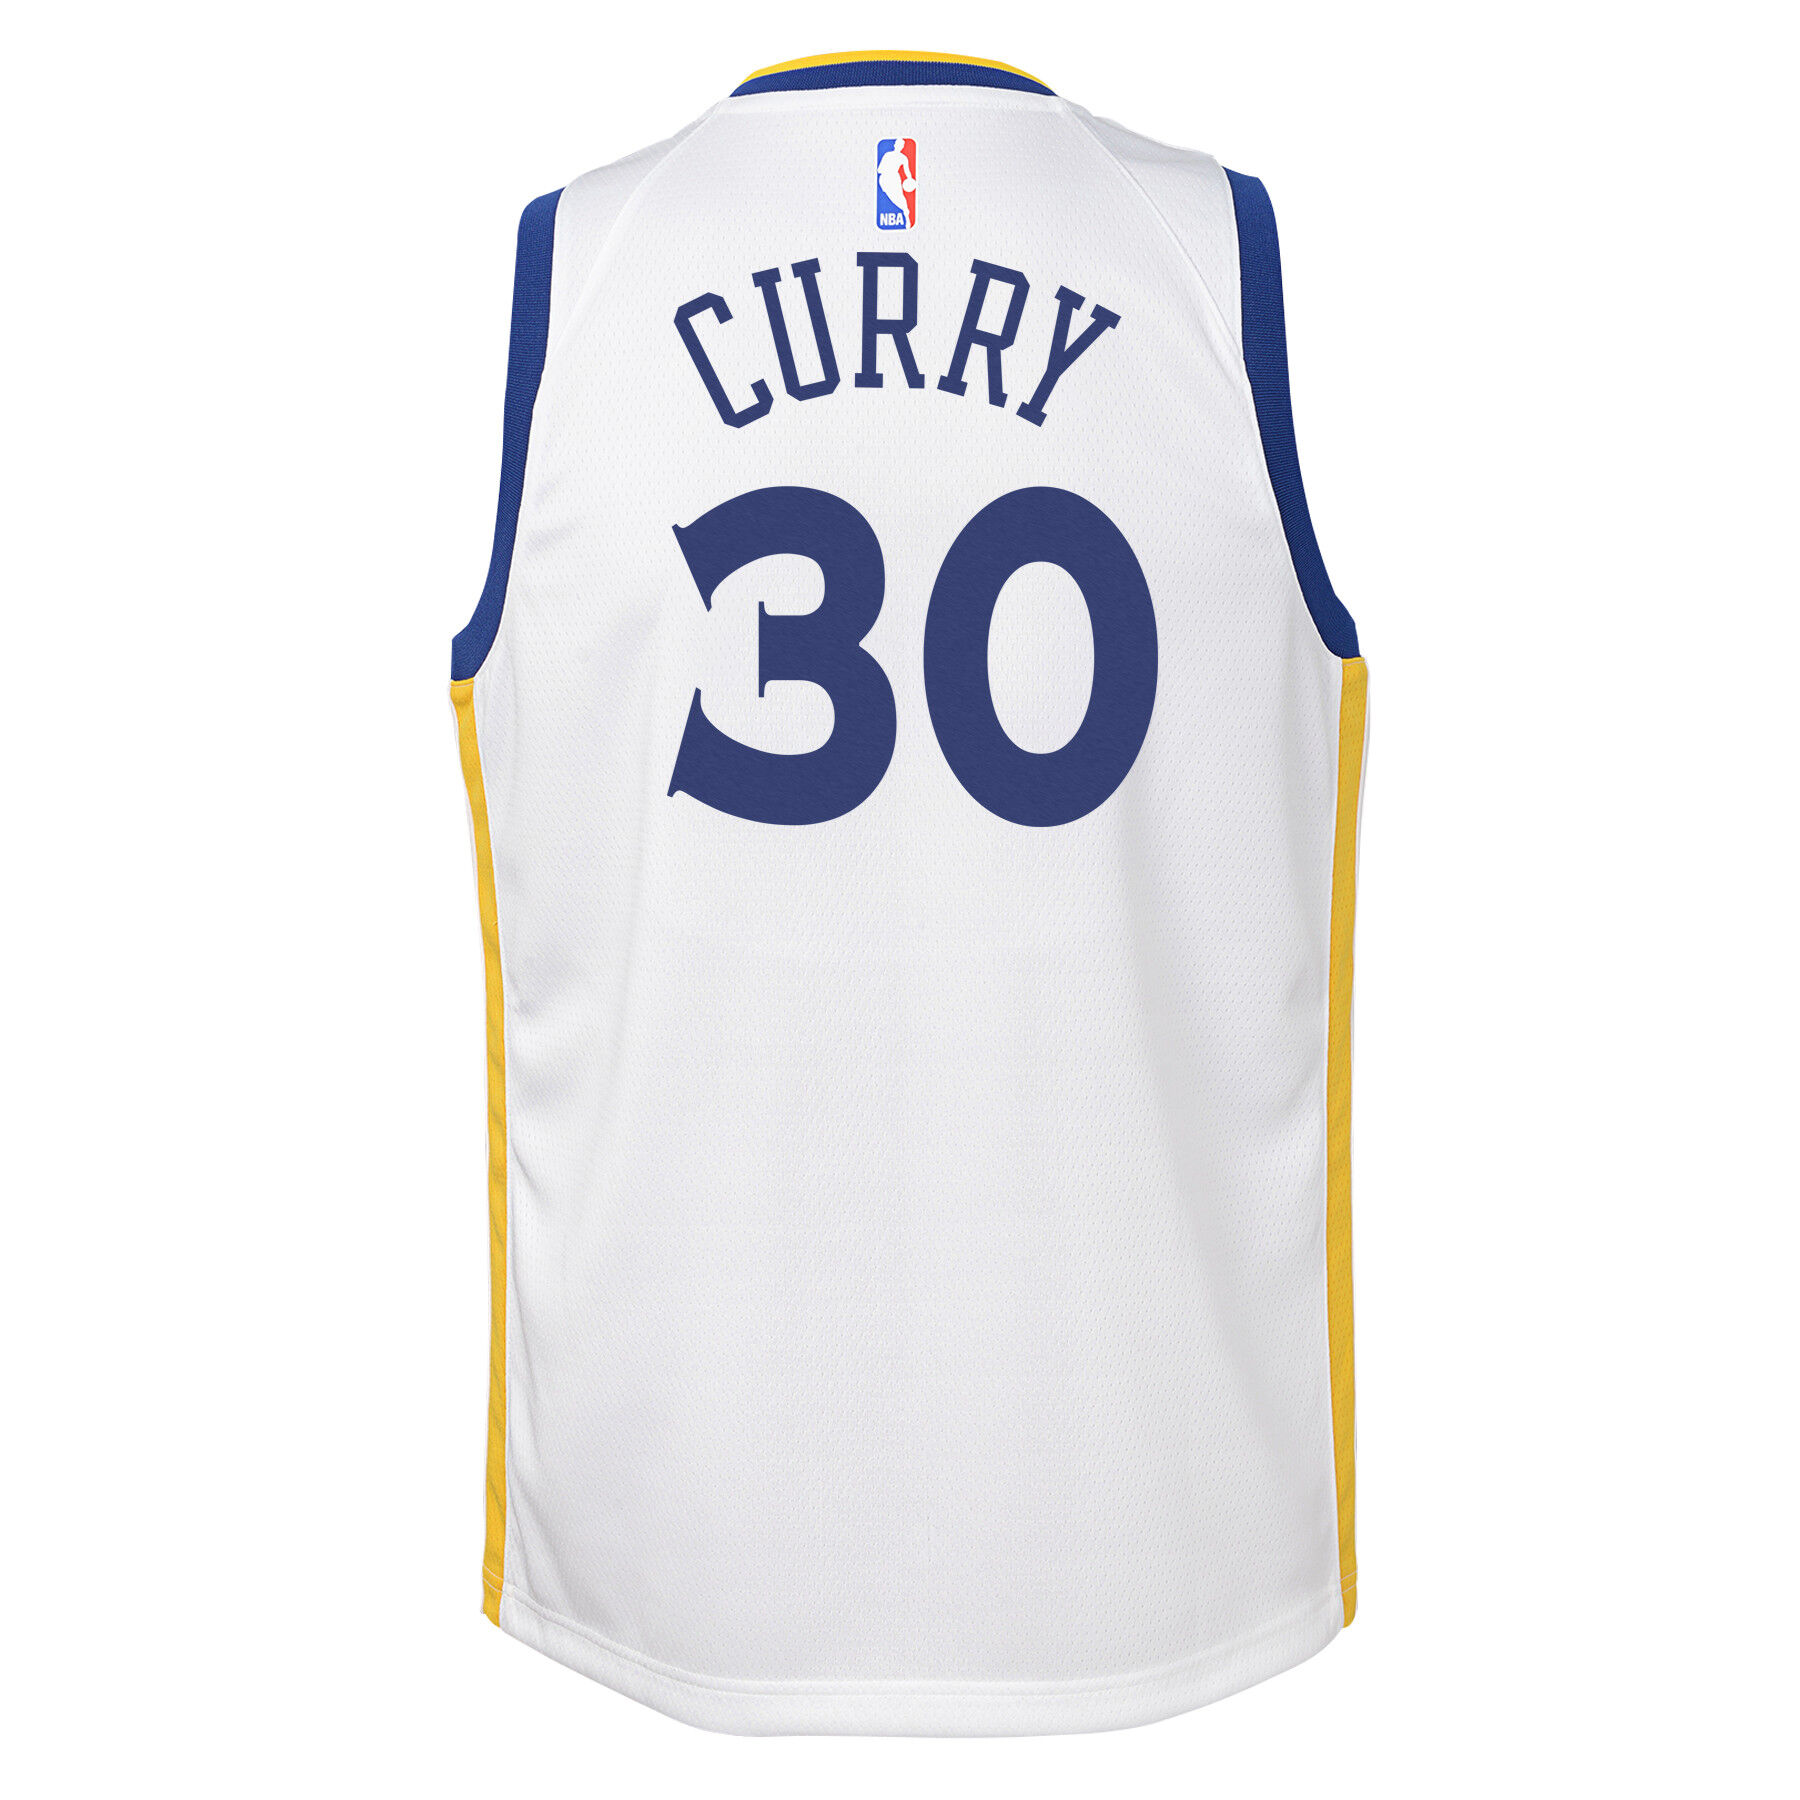 Golden State Warriors Nike Classic Edition Swingman Jersey - Blue - Stephen  Curry - Youth